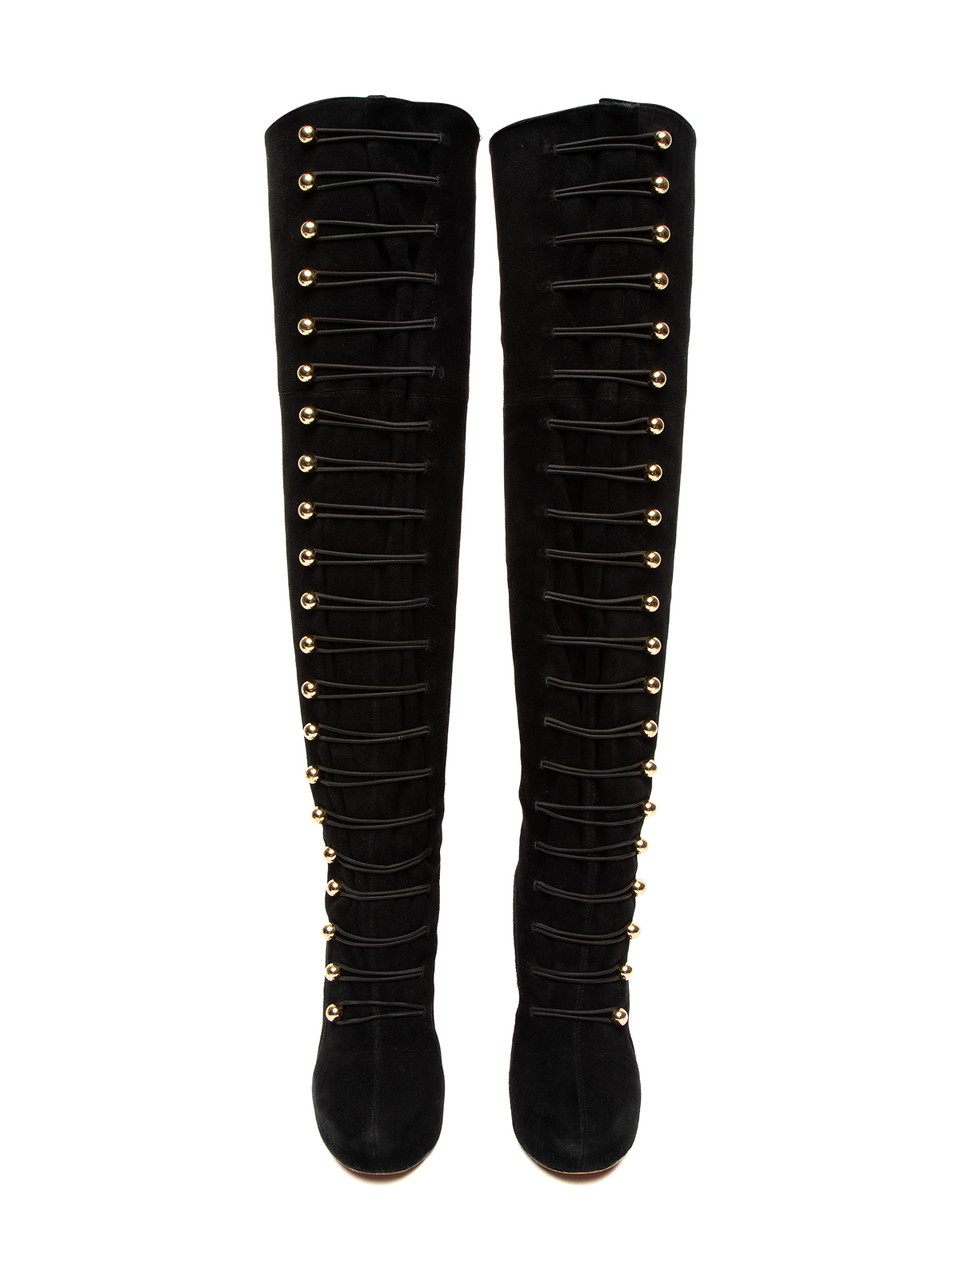 Christian Louboutin Suede Ronfifi Supra Black Over the Knee Boots